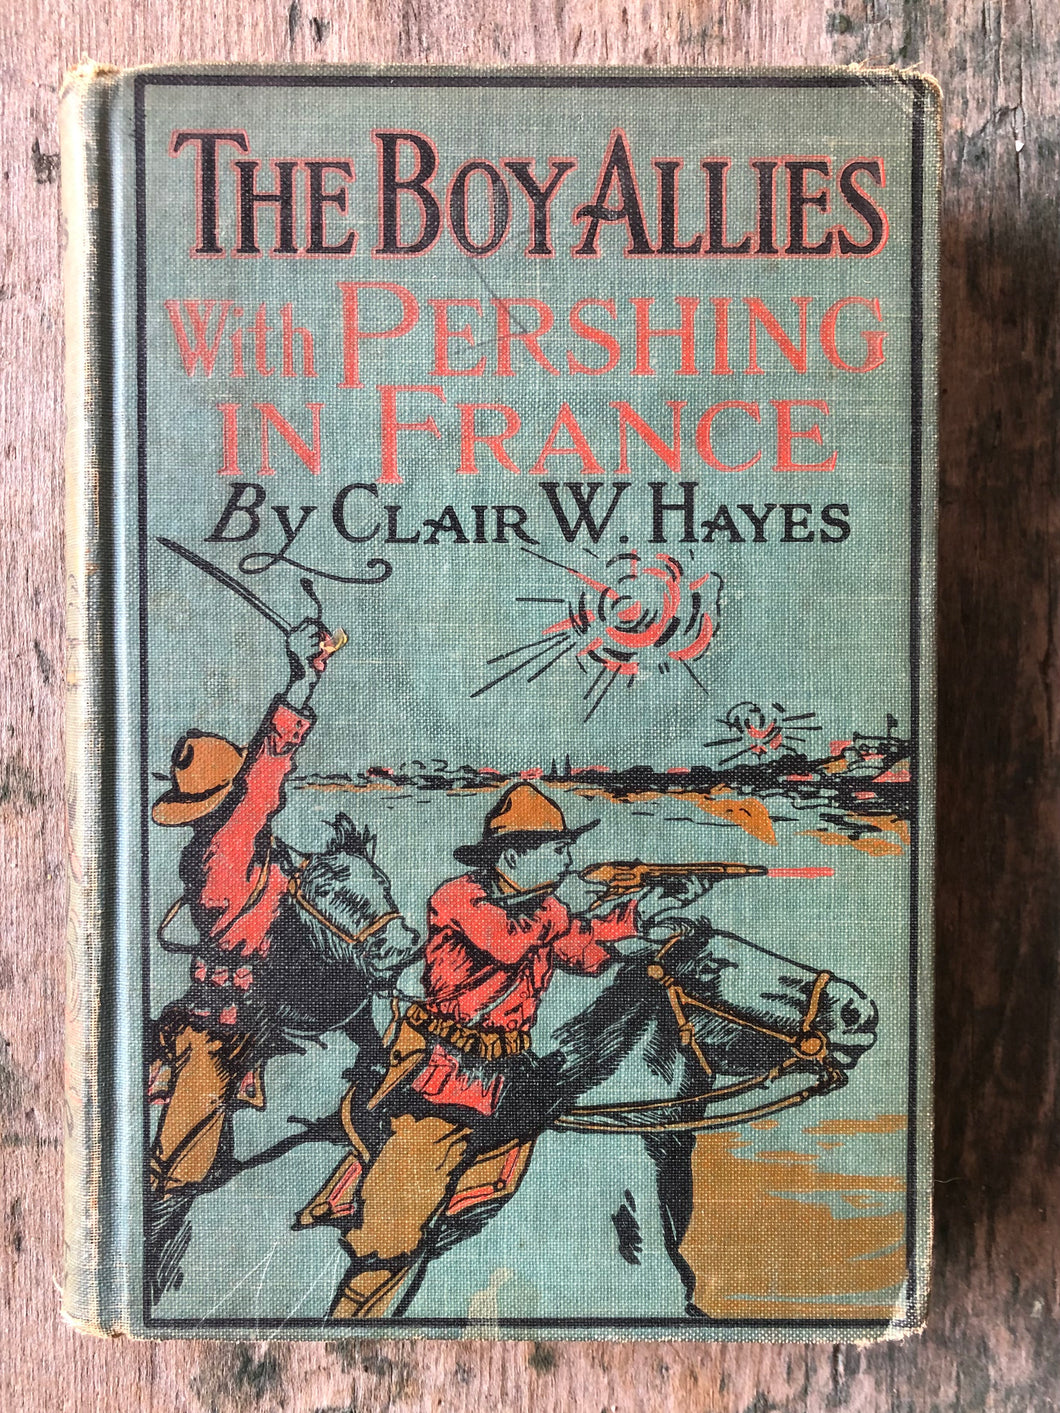 The Boy Allies With Pershing in France or Over the Top at Chateau Thierry by Clair W. Hayes